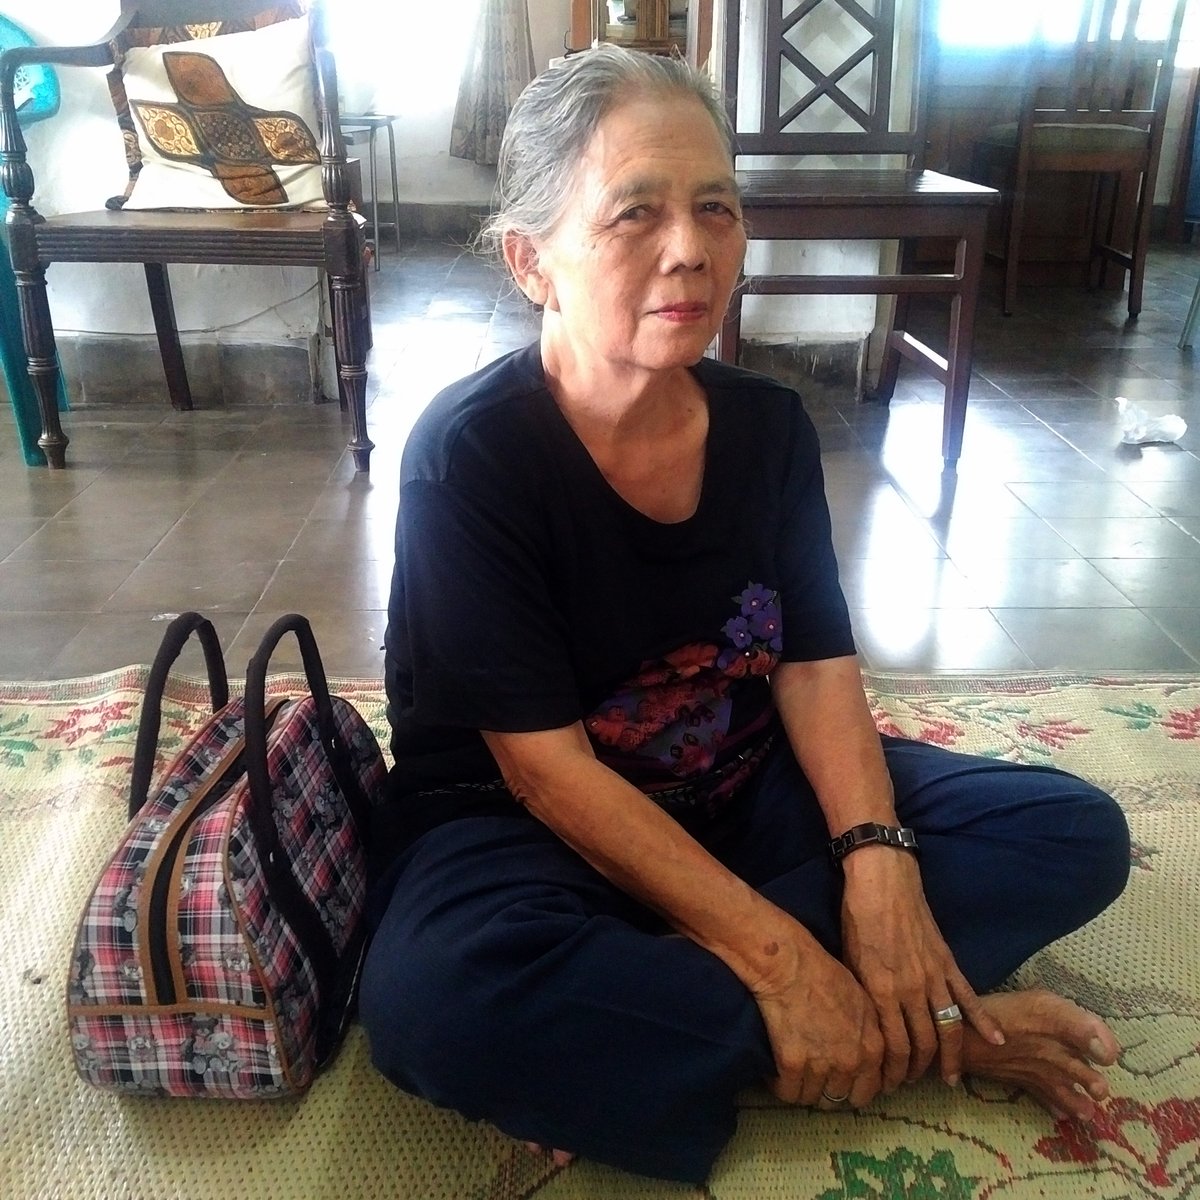 This is Magdalena, an important character in the book. She was not politically active, but worked at a t-shirt factory and was a member of the union. So in 1965, they took her away for a long time. She now lives in poverty in Solo, Indonesia.